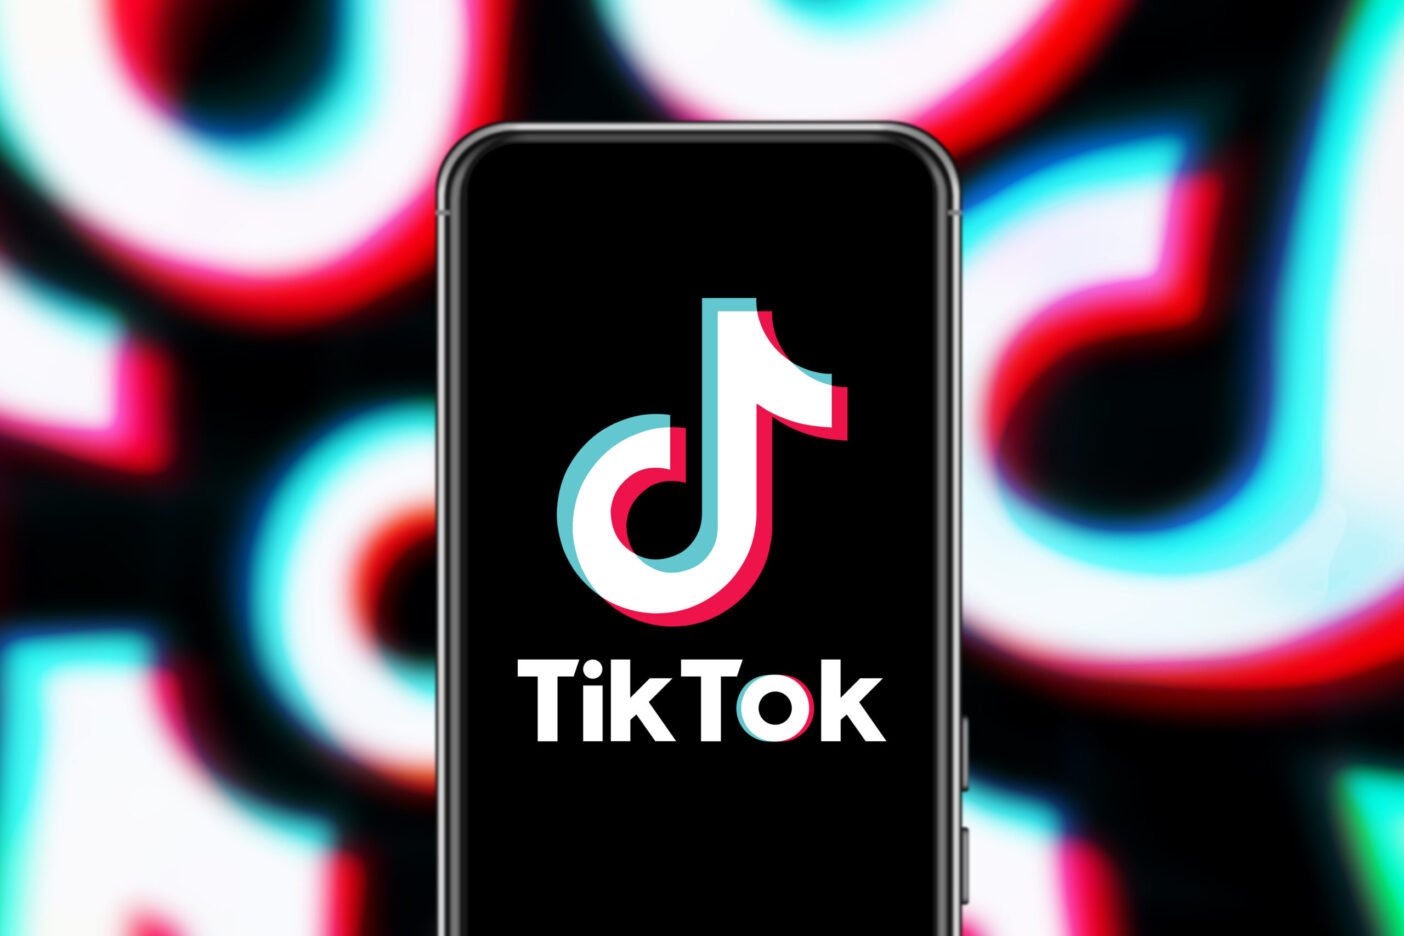 Surprised by the new meaning of ASL in TikTok?